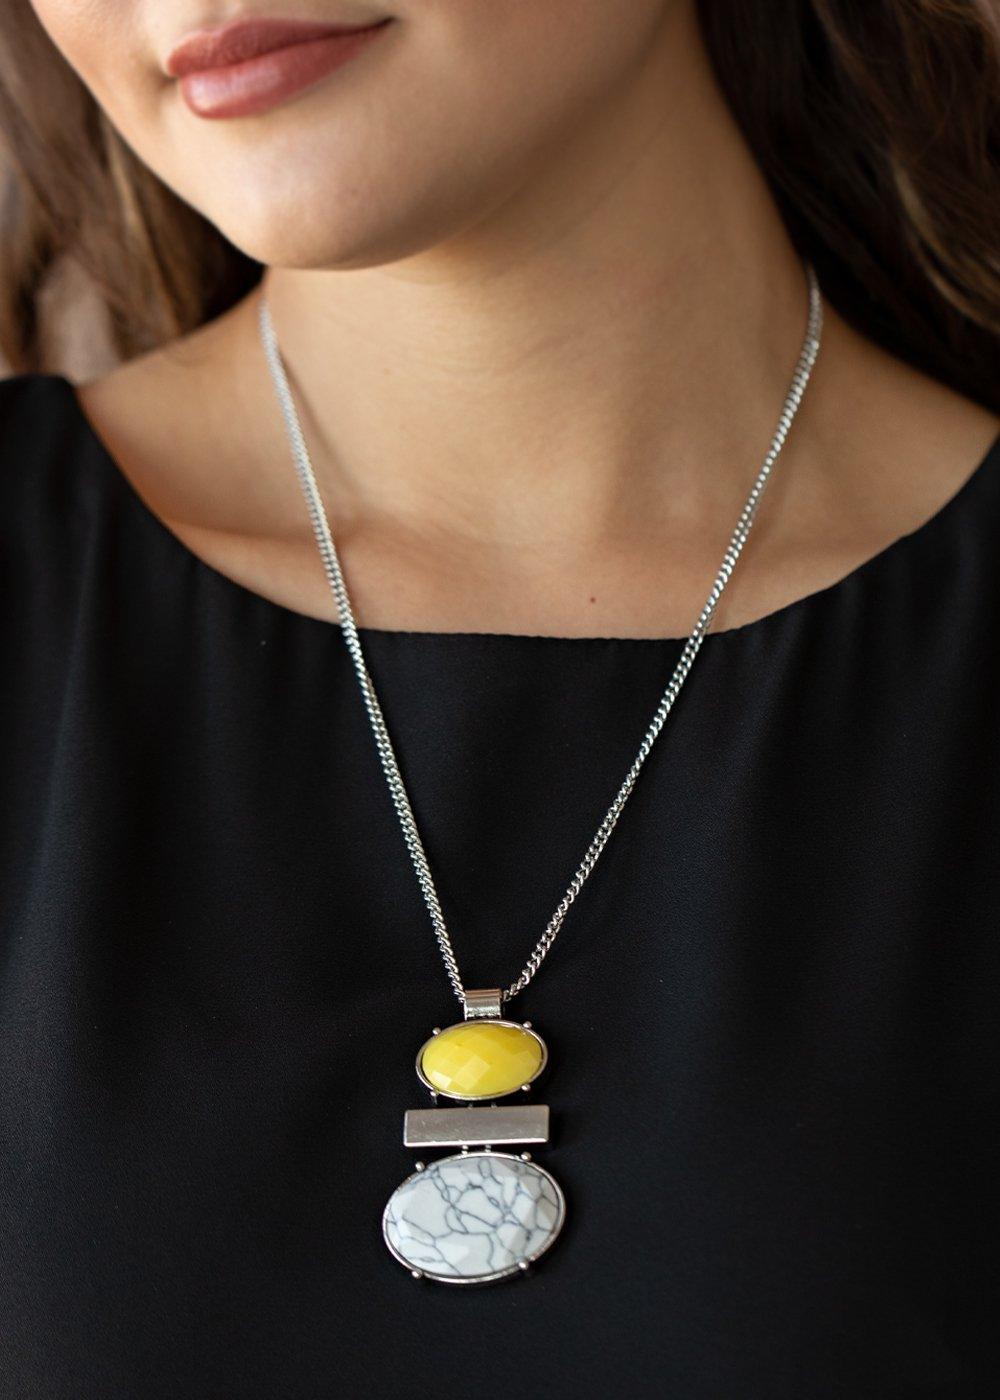  Paparazzi Accessories-Finding Balance - Yellow Necklace